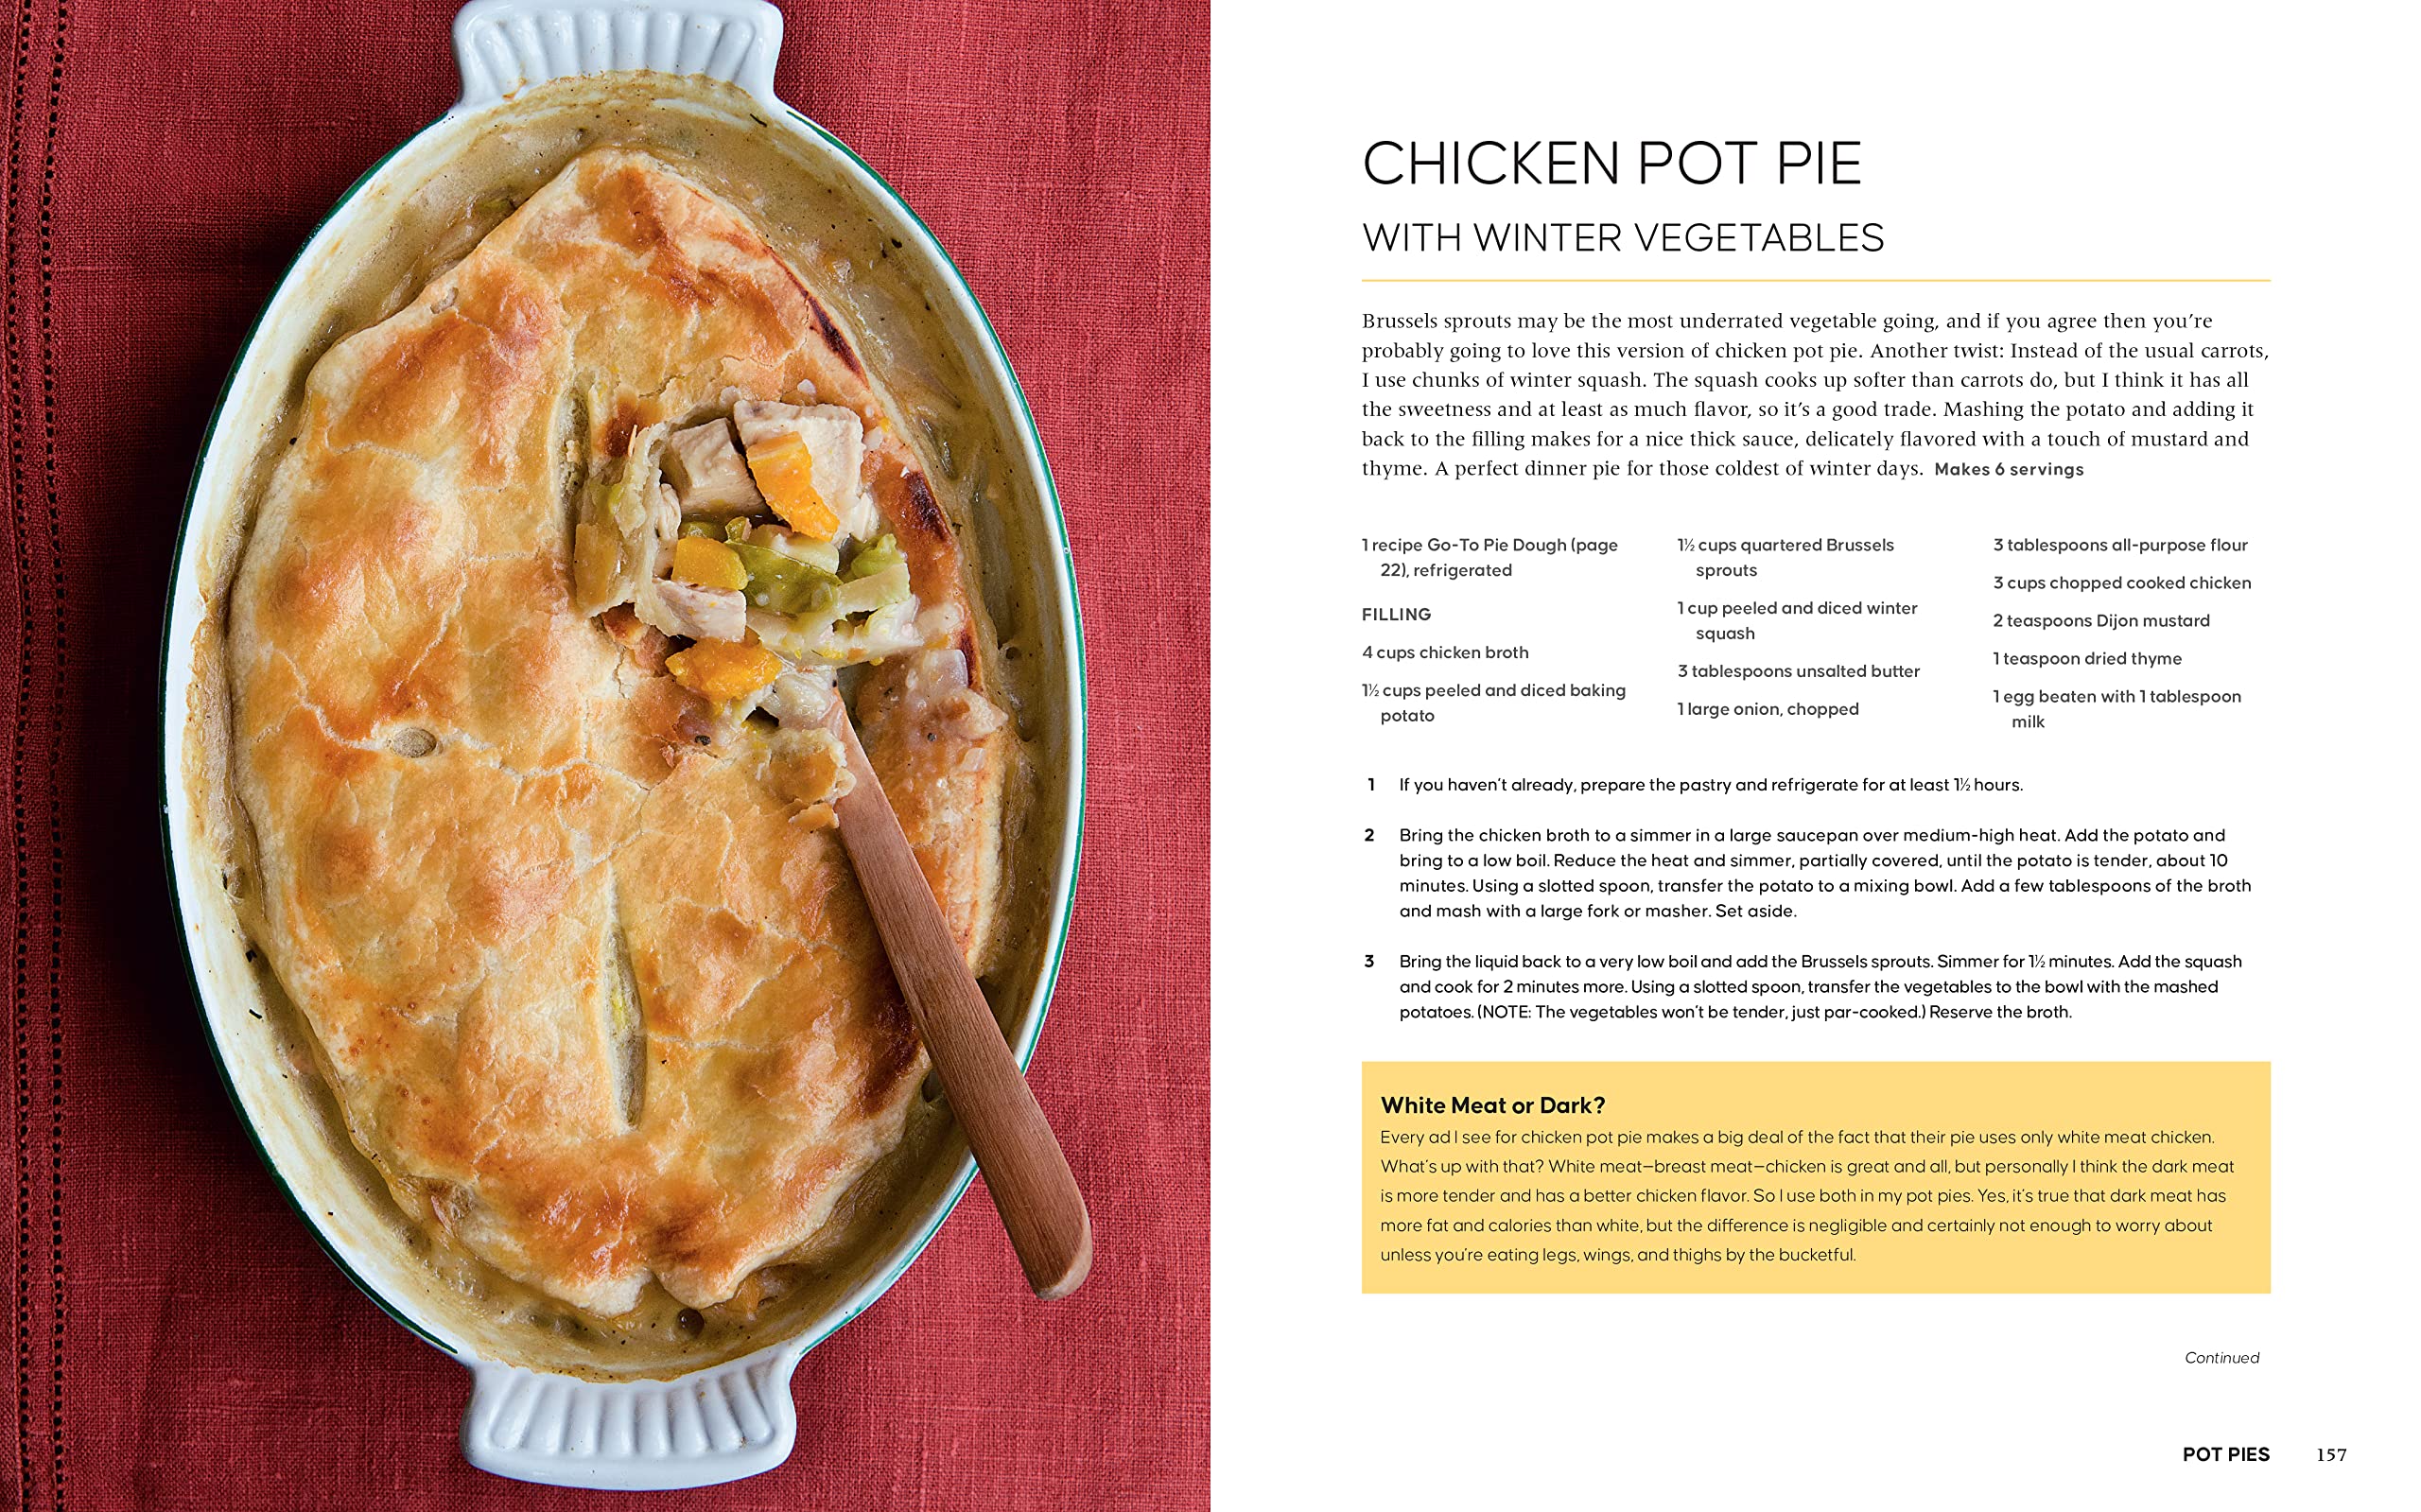 Savory Dinner Pies: More than 80 Delicious Recipes from Around the World (Ken Haedrich)